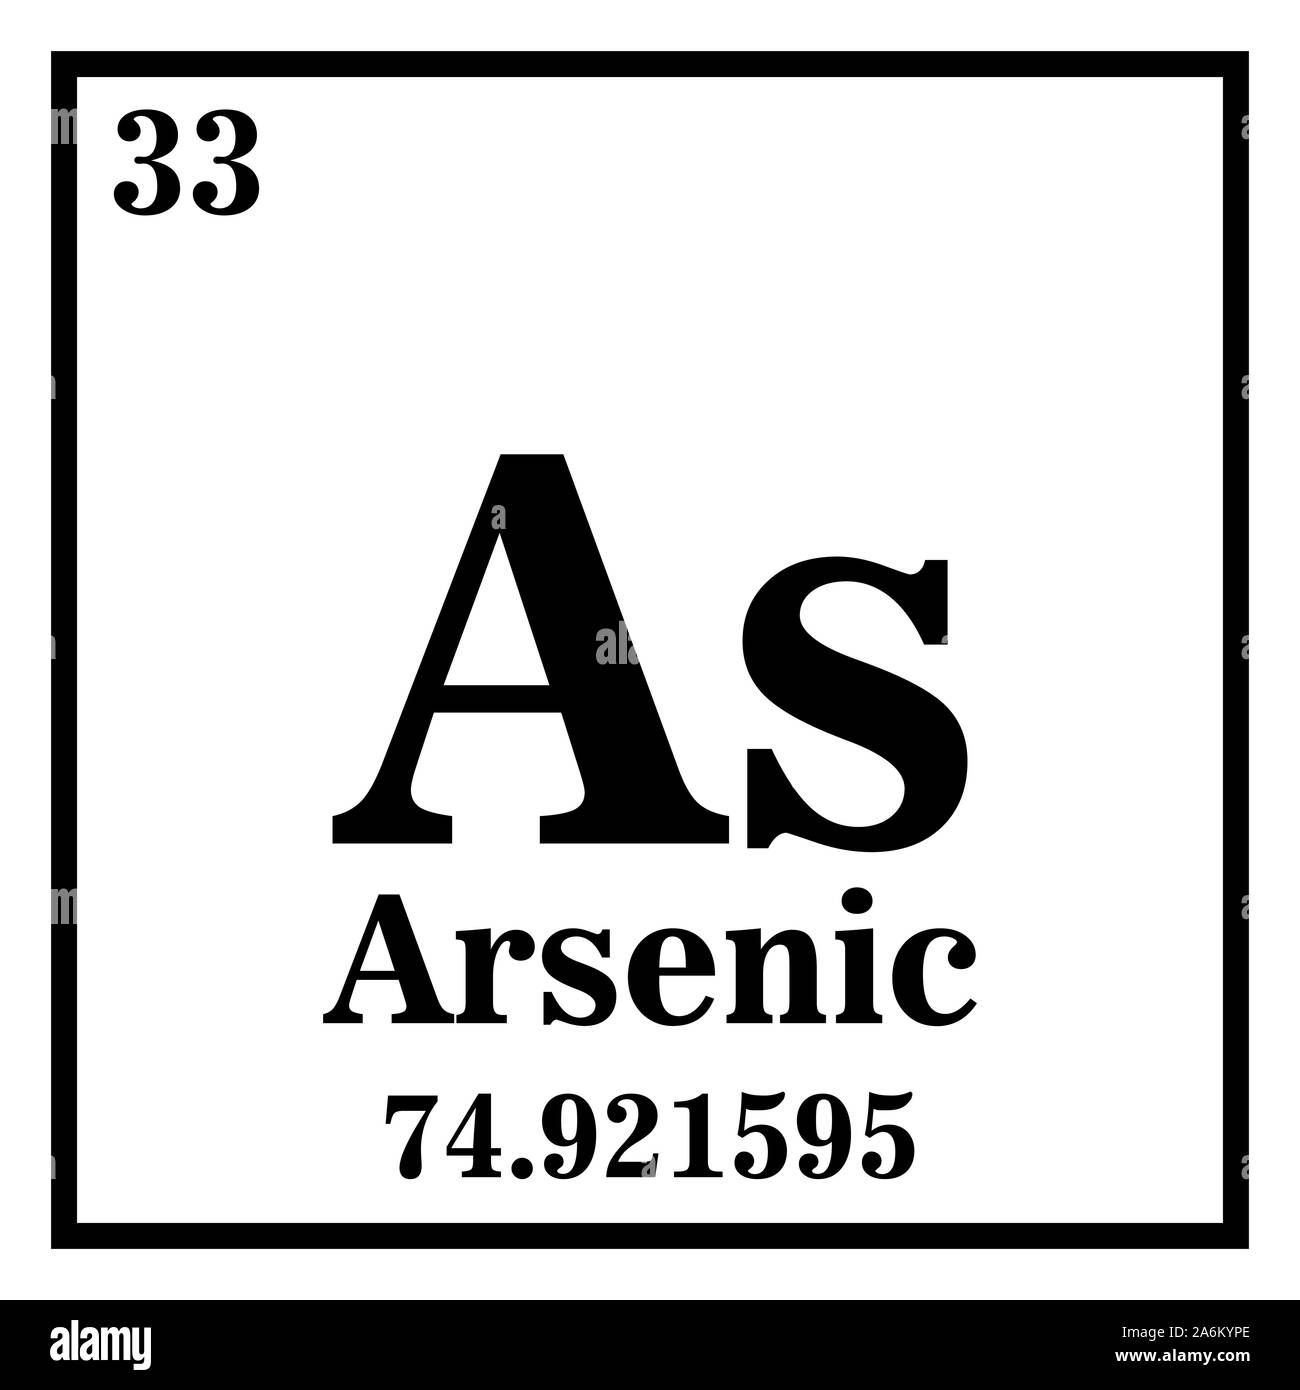 Arsenic Periodic Table of the Elements Vector illustration eps 10. Stock Vector